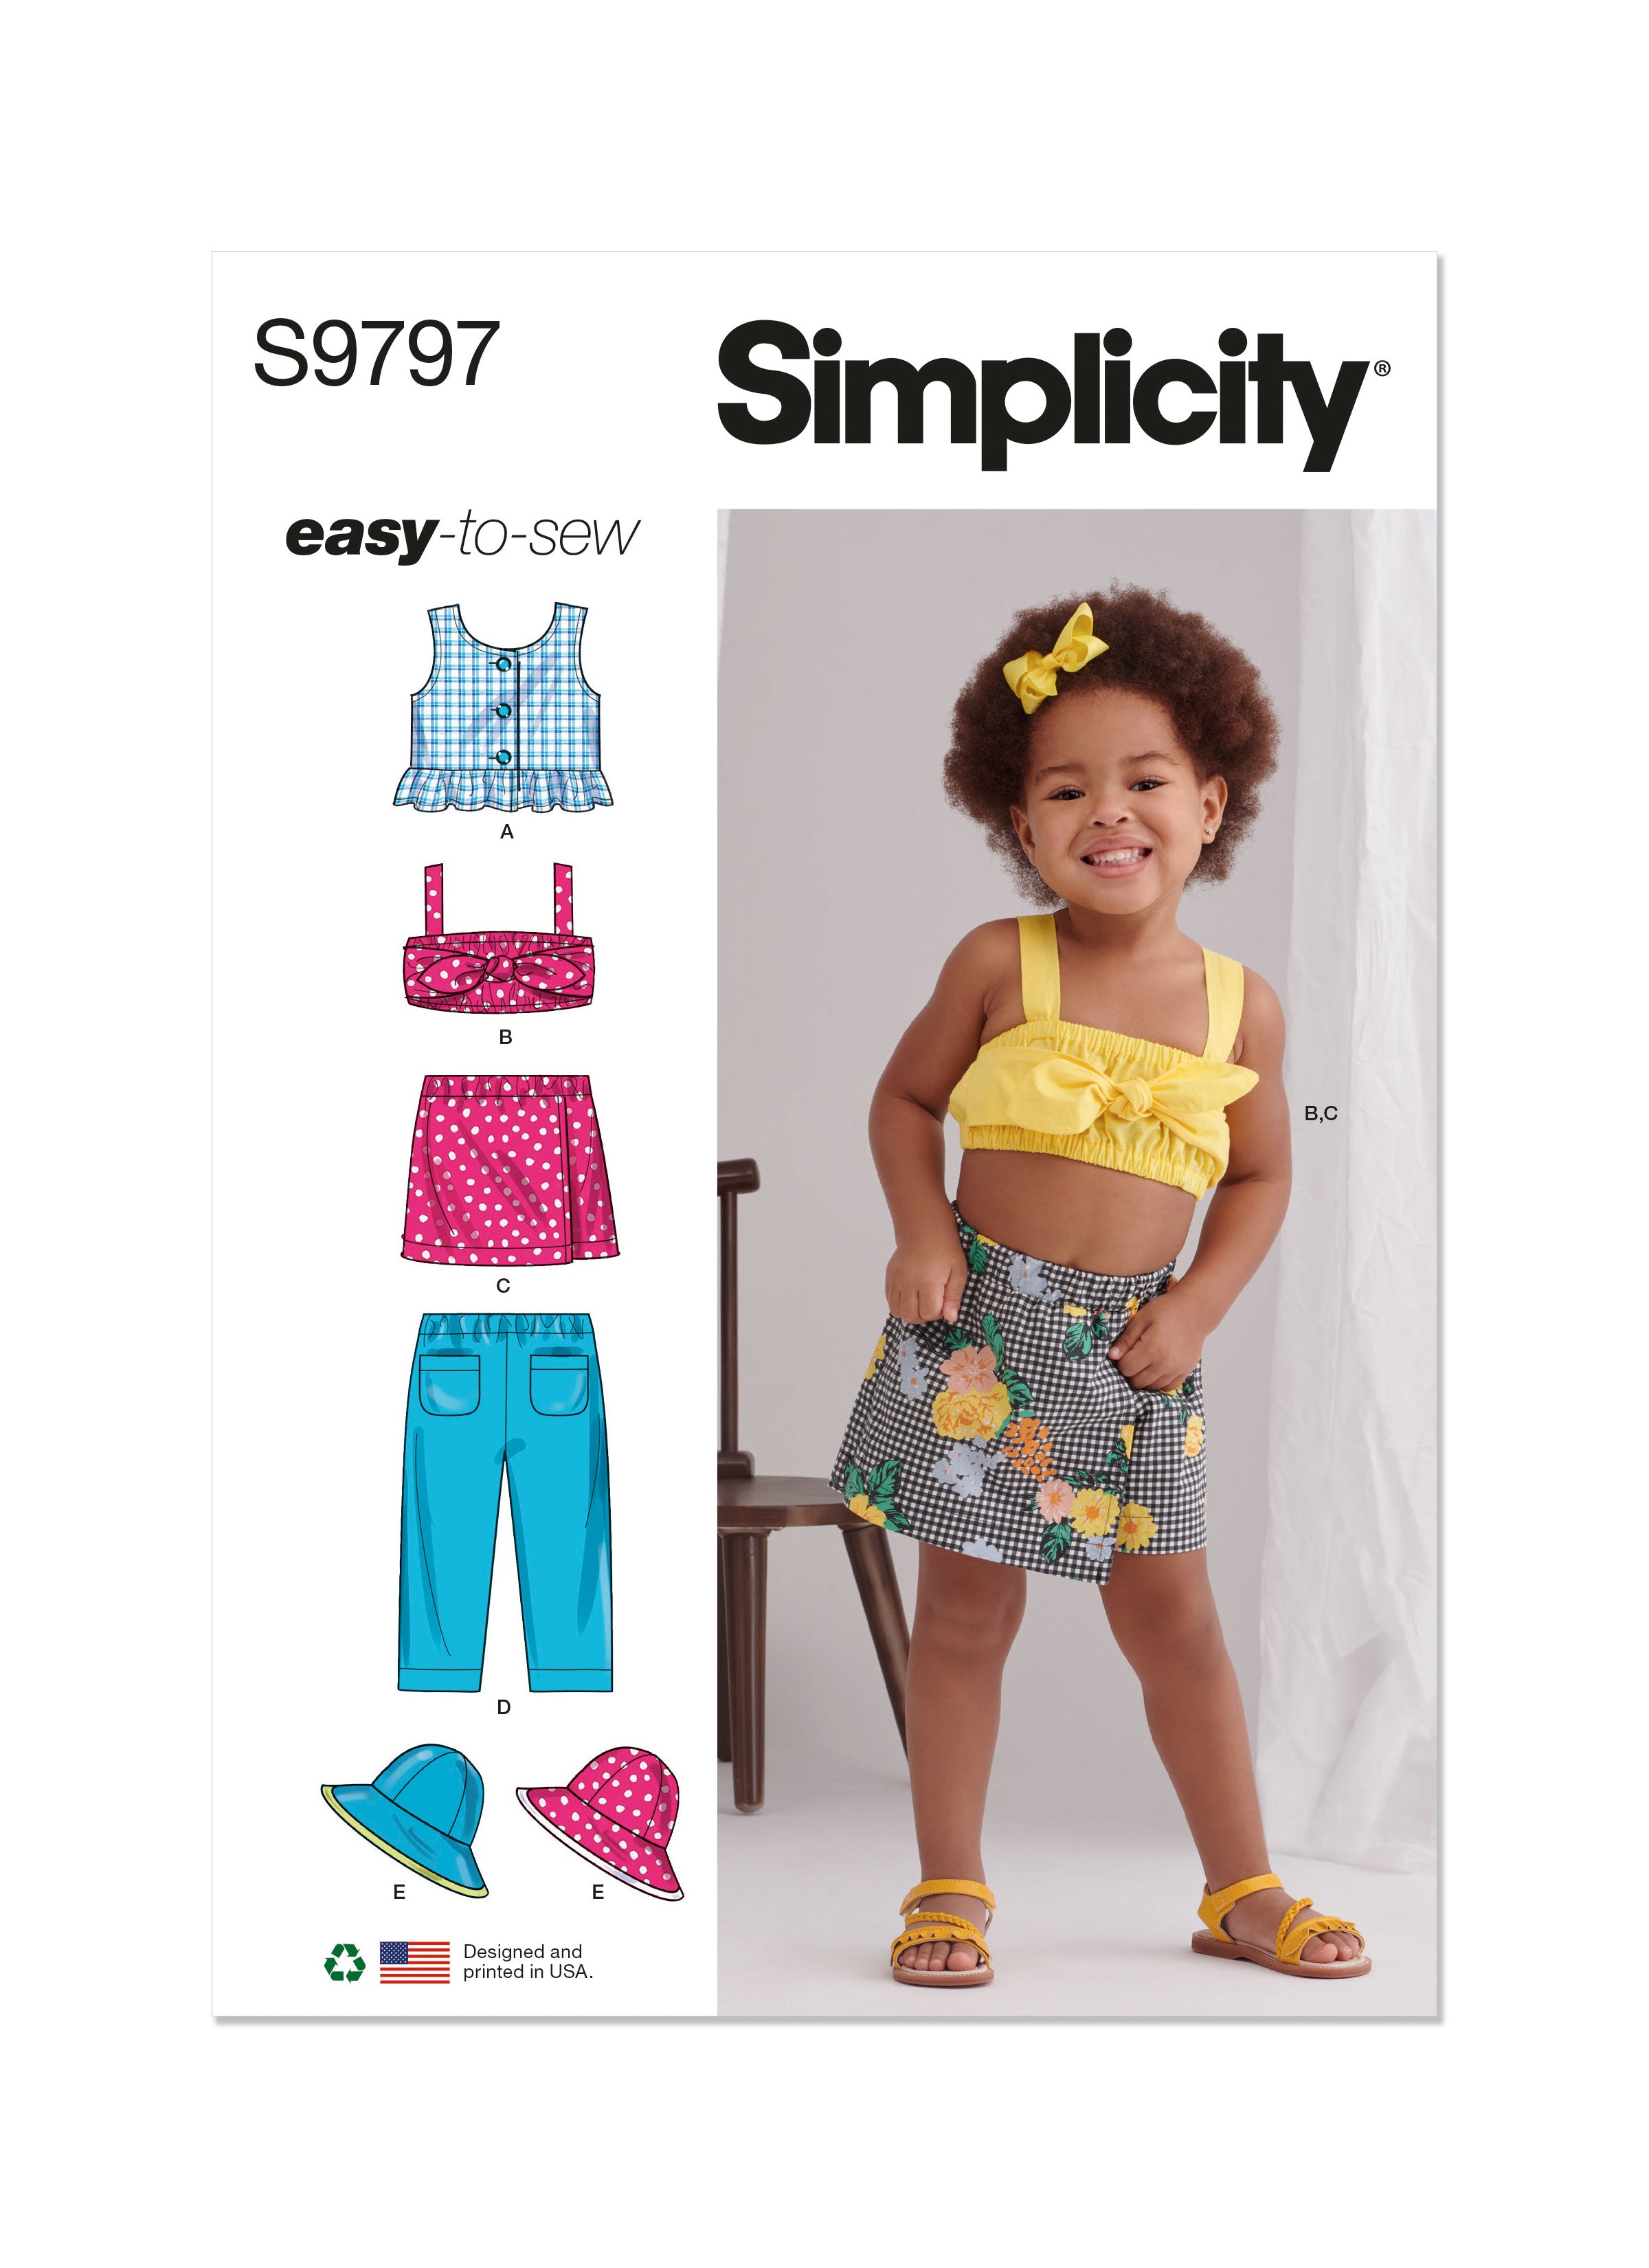 Simplicity sewing pattern 9797 Toddlers' Tops, Skort, Pants and Hat from Jaycotts Sewing Supplies